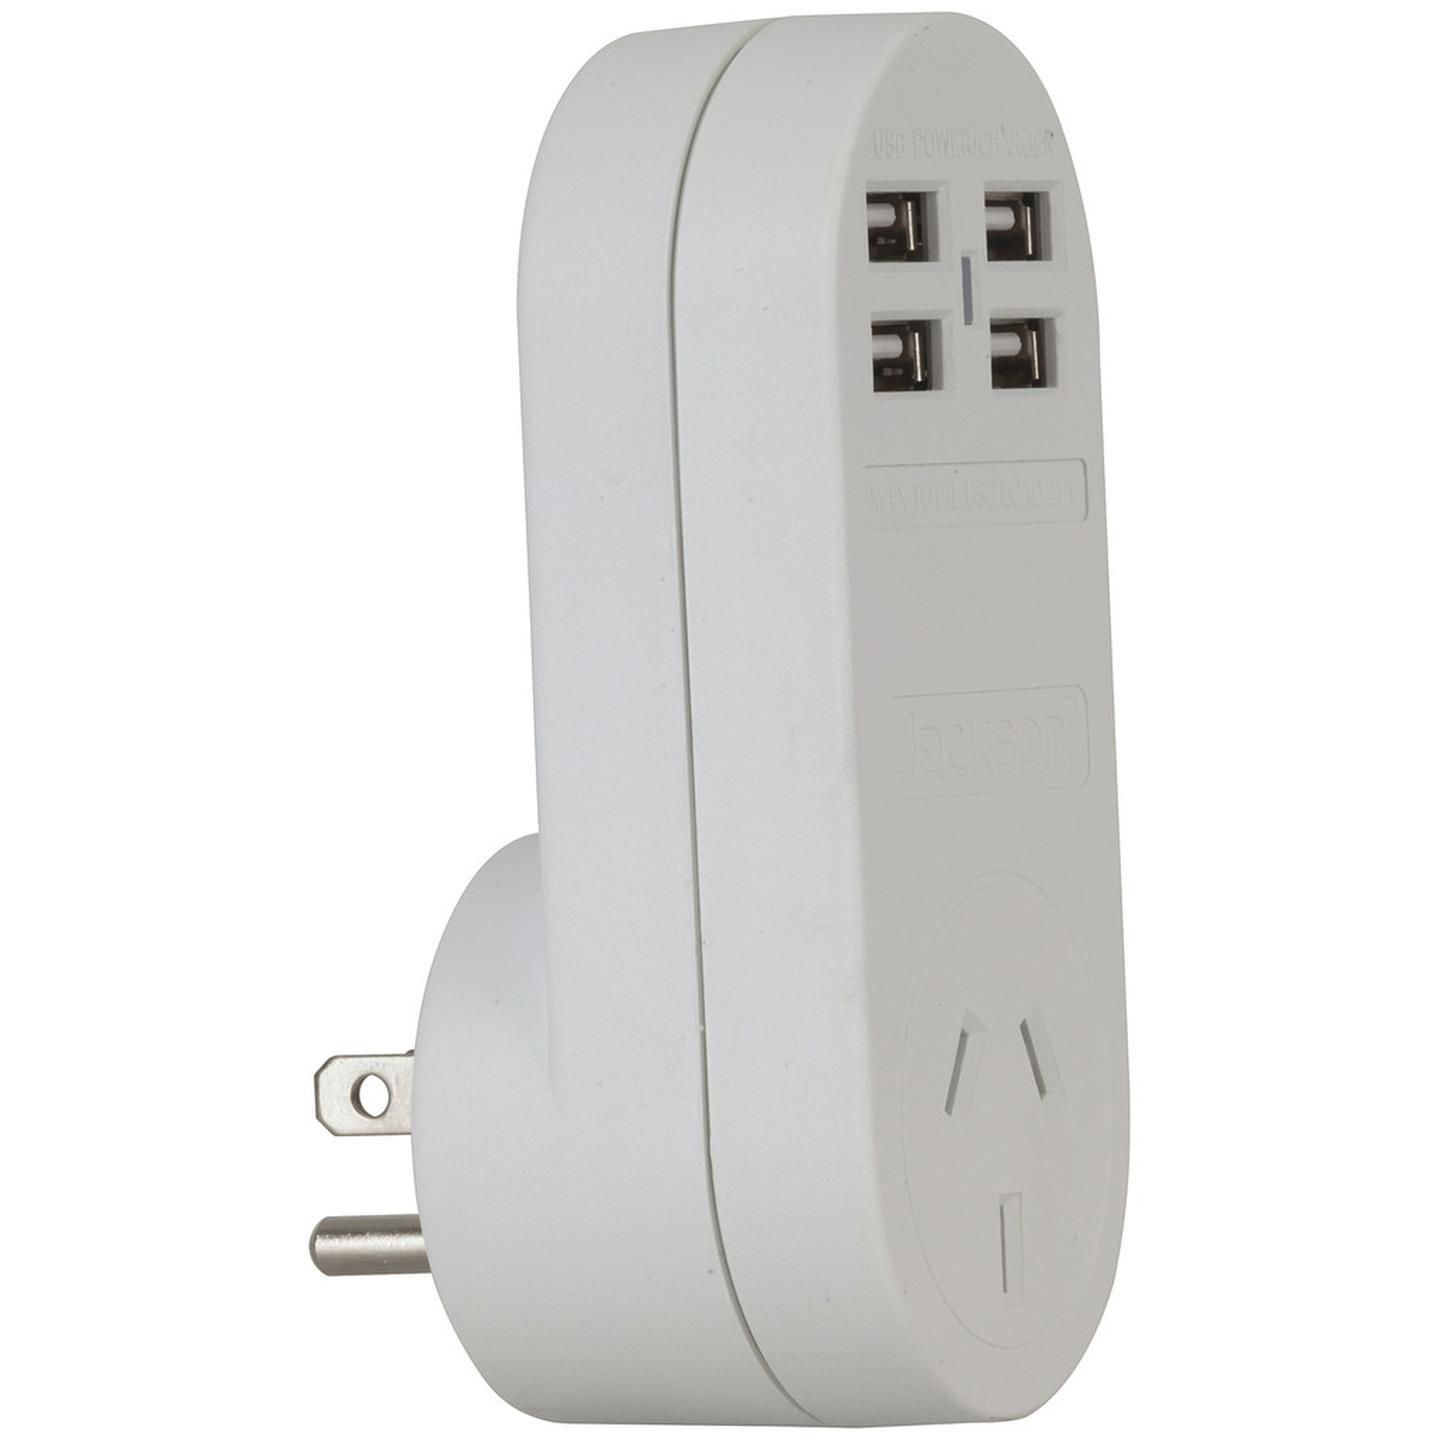 Outbound USA Mains Travel Adaptor with 4 USB Sockets